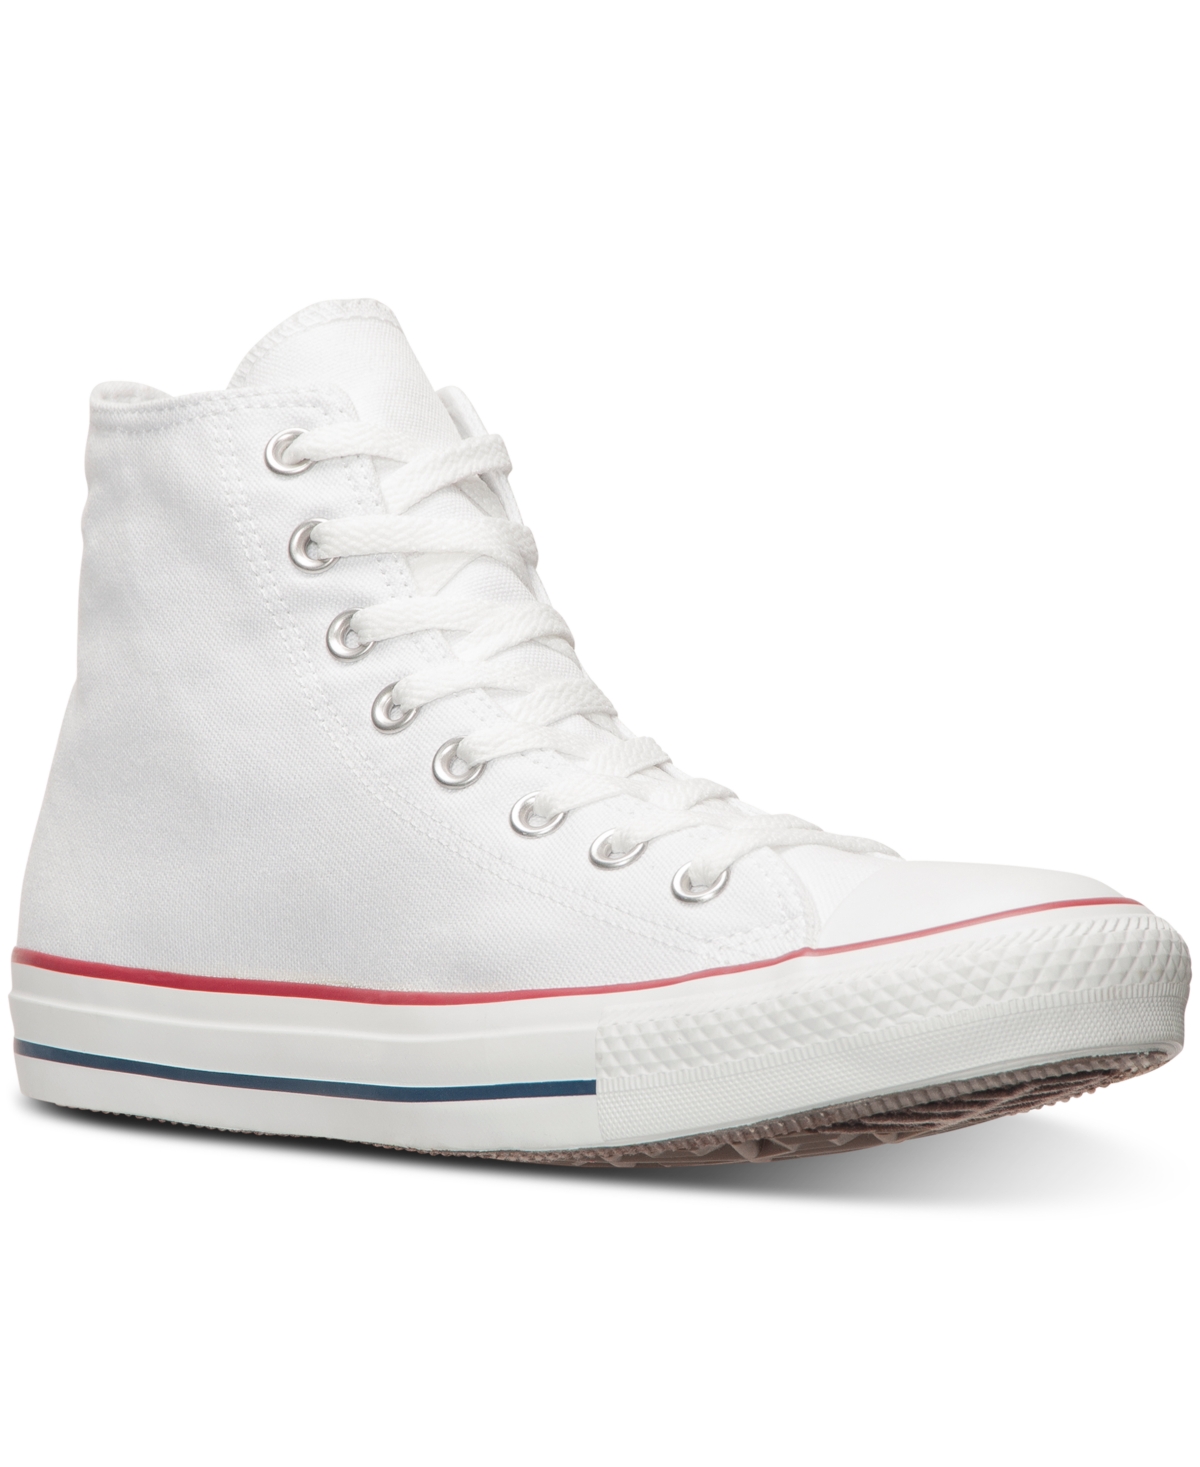 UPC 022859282697 product image for Converse Men's Chuck Taylor Hi Top Casual Sneakers from Finish Line | upcitemdb.com